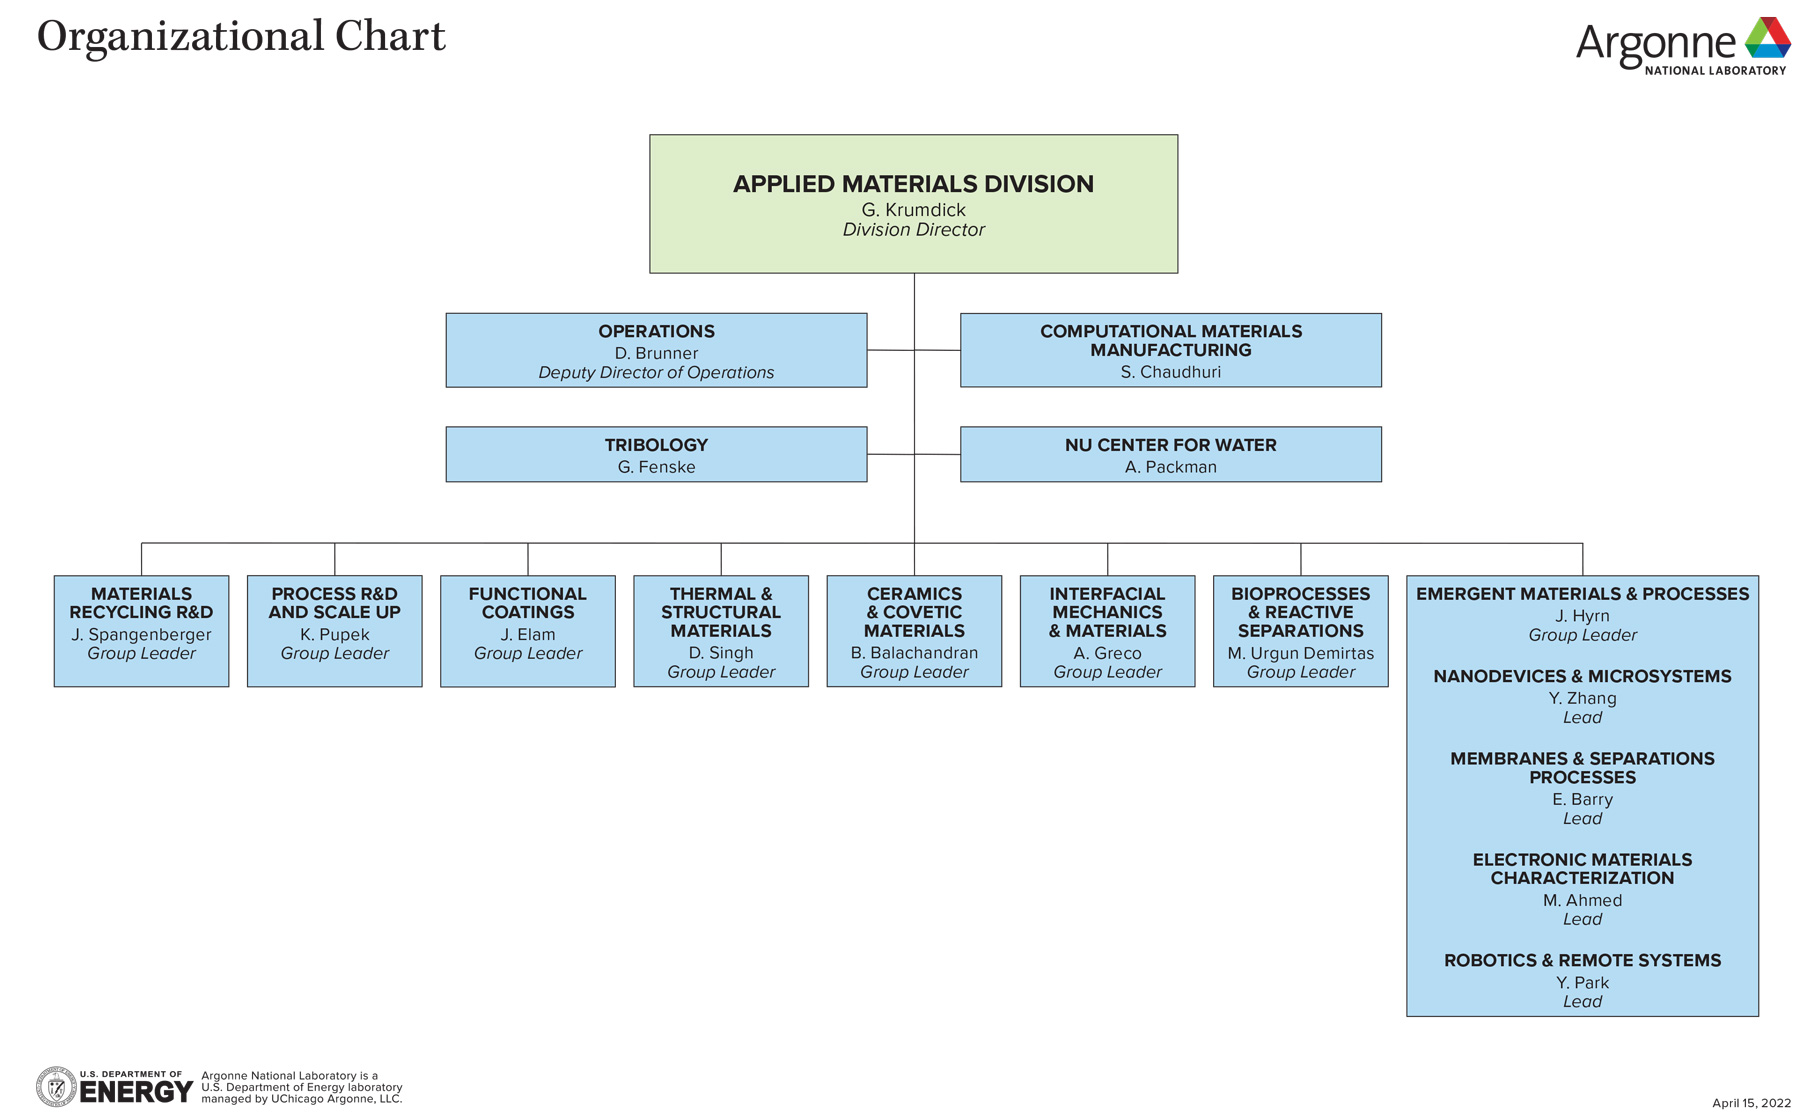 Organization chart of the Argonne Applied Materials division